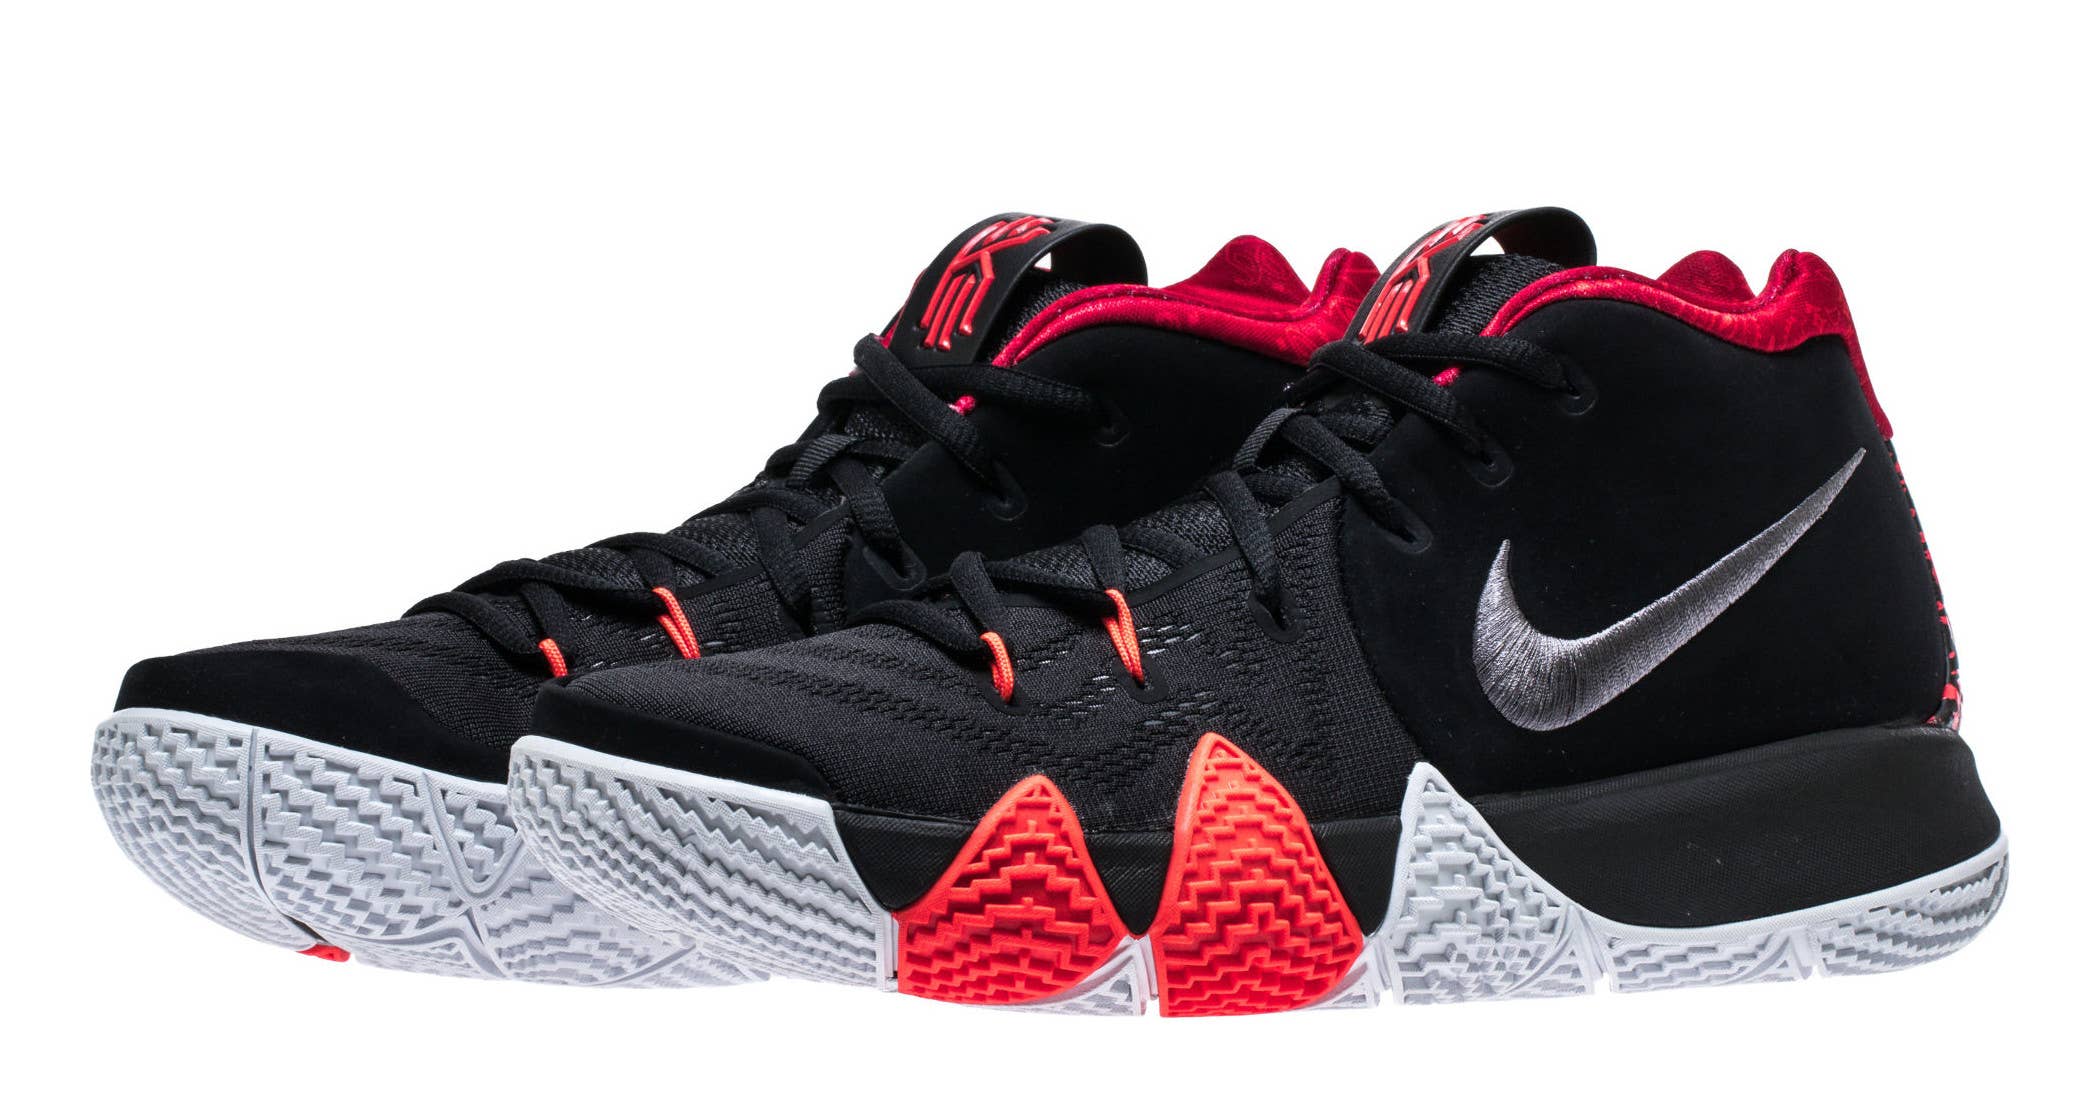 Nike Kyrie 4 '41 for Ages' (Pair)